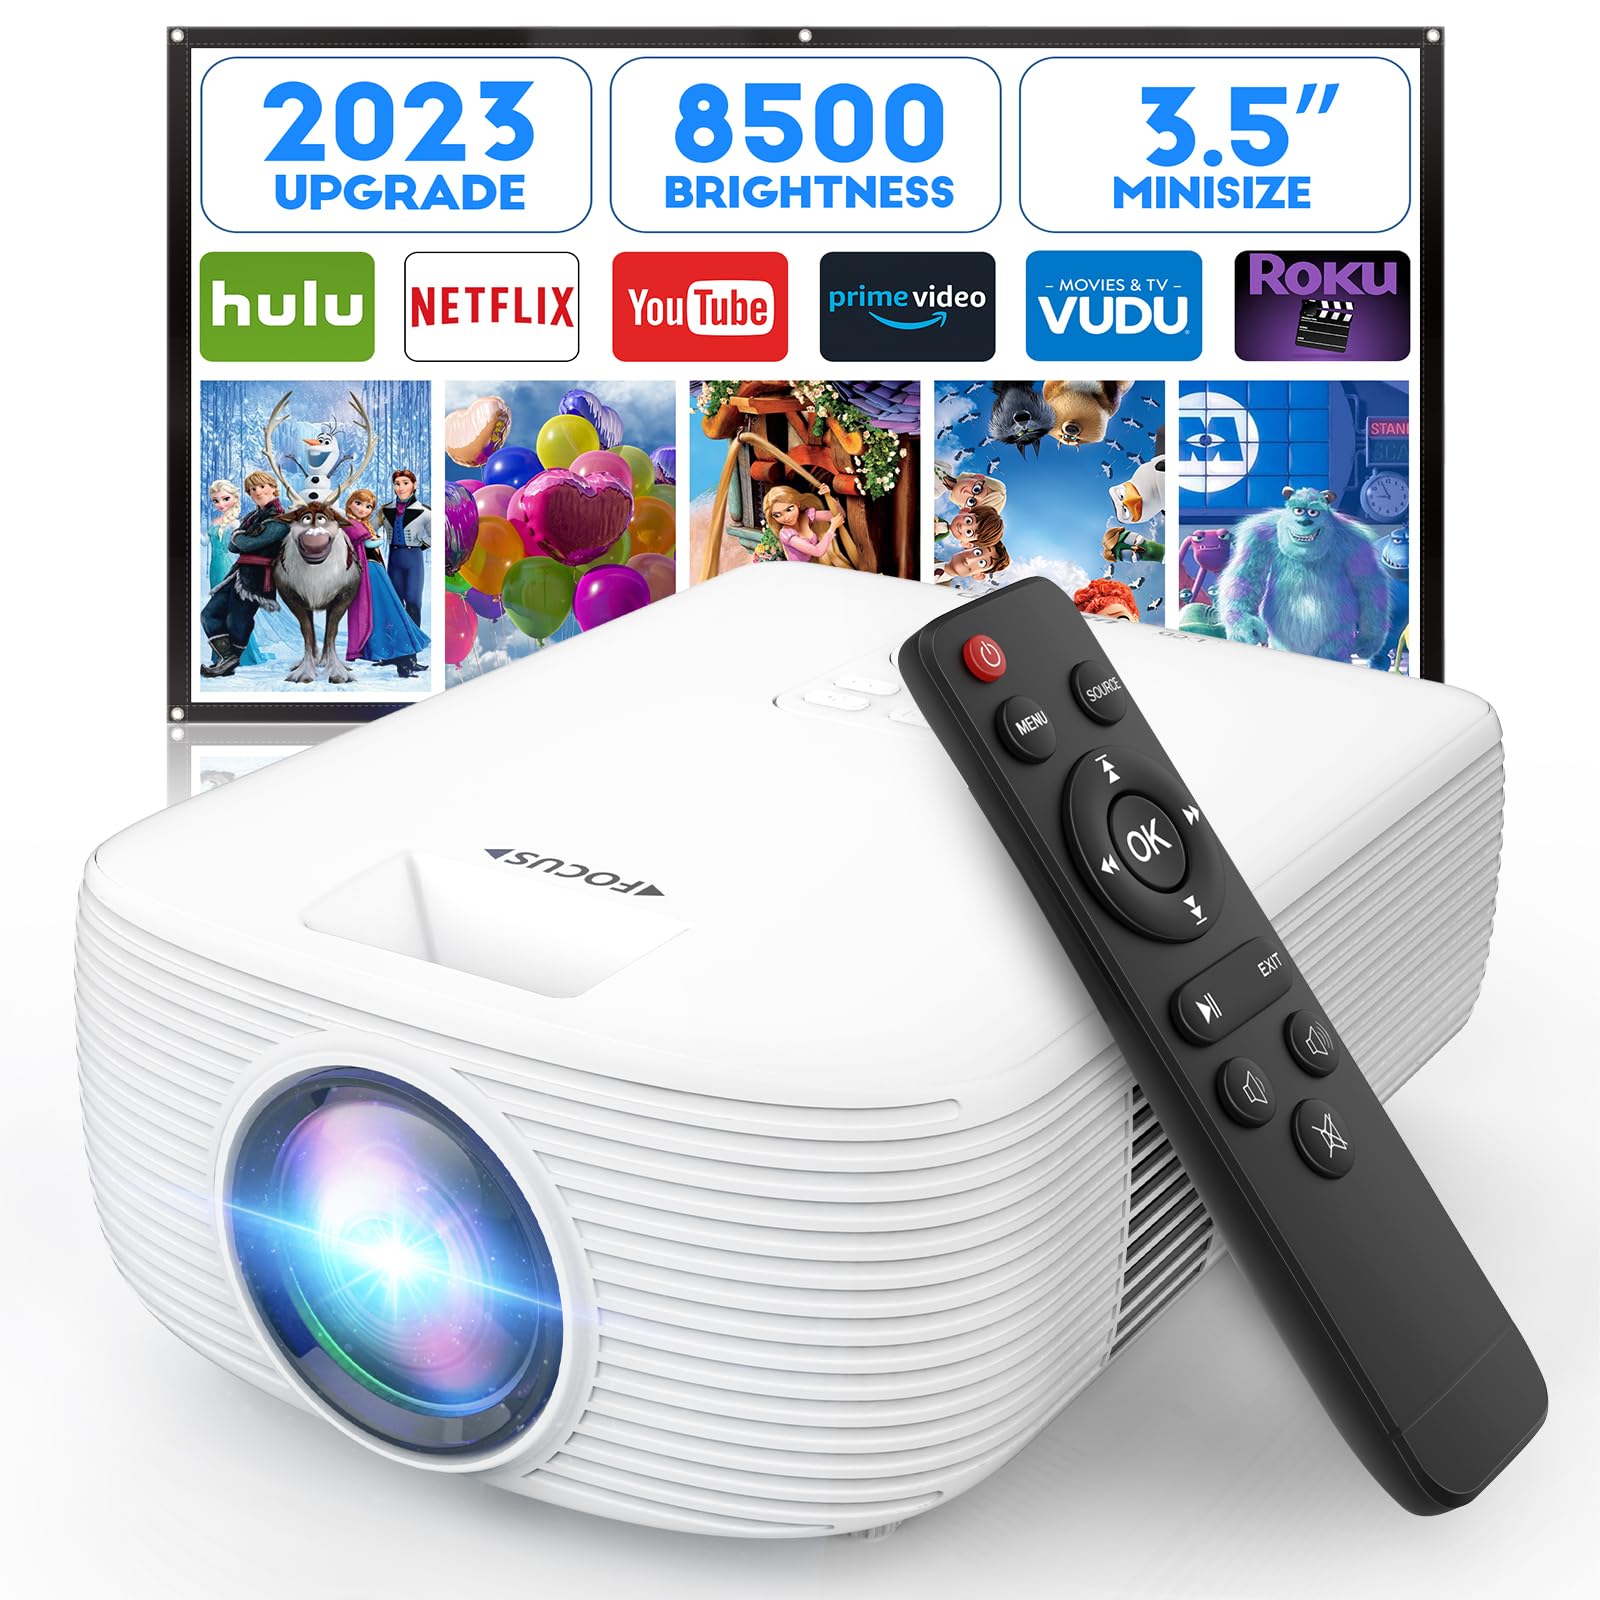 Mini Outdoor Projector, 2023 Upgraded Brightness, 1080P Supported Projector, Portable Movie Projector for Home Theater Compatible with TV Stick HDMI USB AV